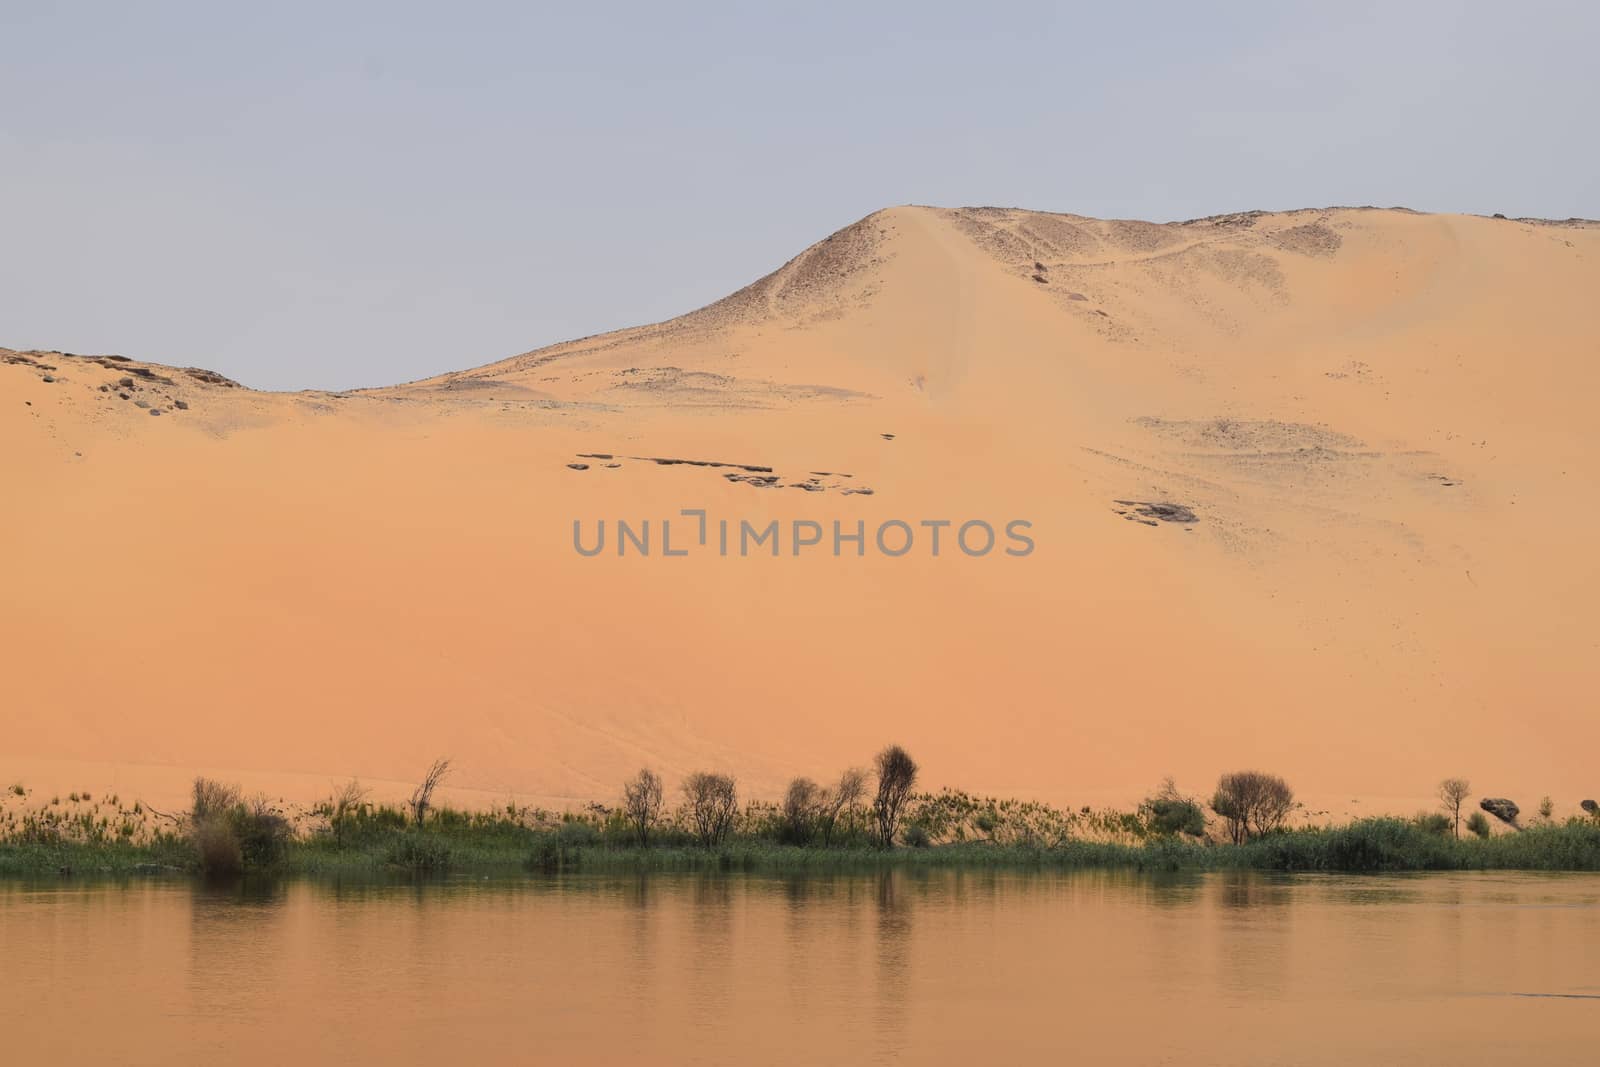 The beginning of the Sahara Desert With the Nile in the foreground taken in Aswan Egypt